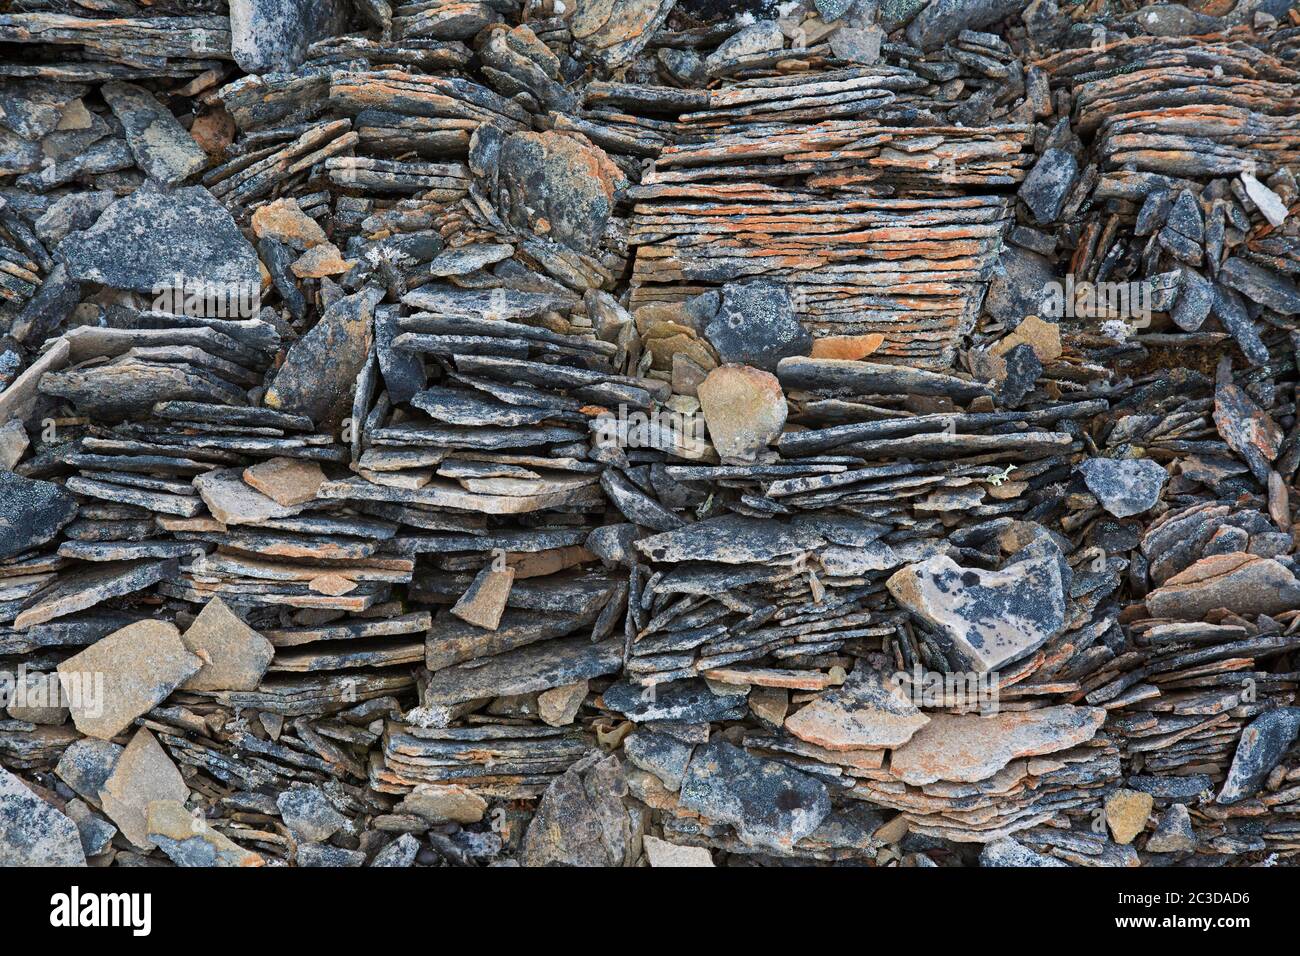 Close-up of shattered sedimentary rock, slate / shale fractured along existing joints by frost weathering on Svalbard / Spitsbergen, Norway Stock Photo